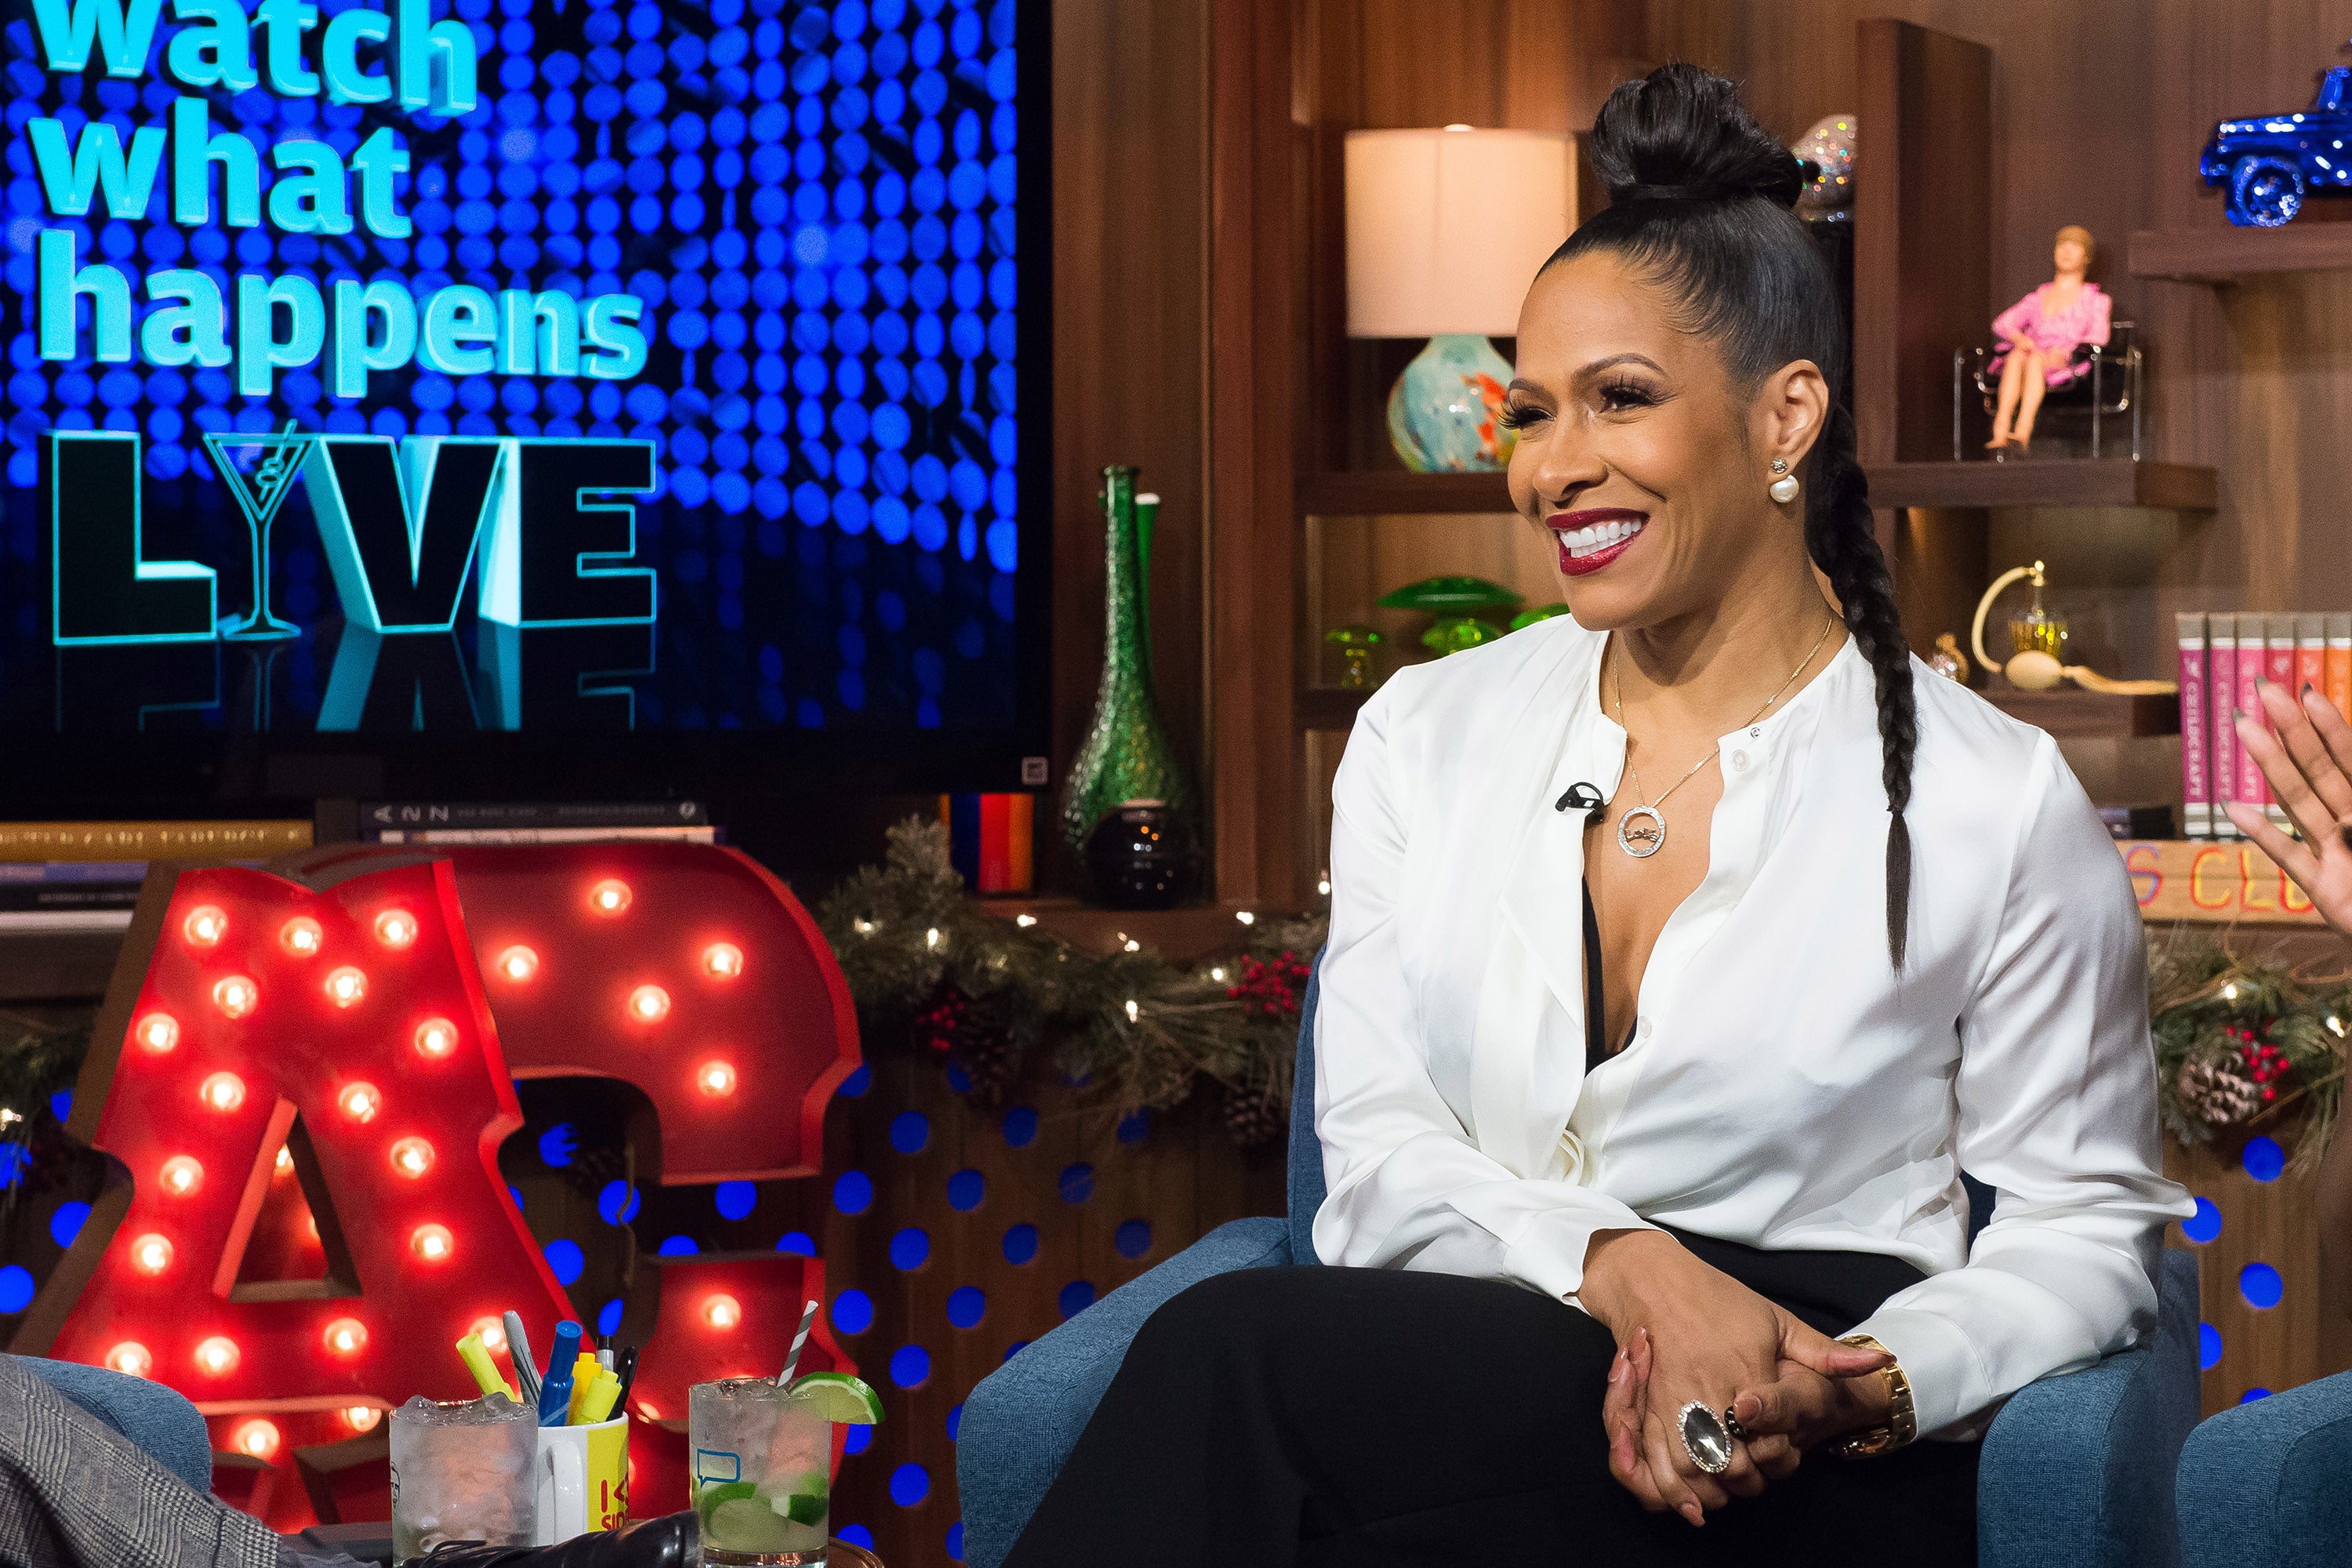 The Drama Continues Between Sheree Whitfield And Kenya Moore With New Shot Fired
